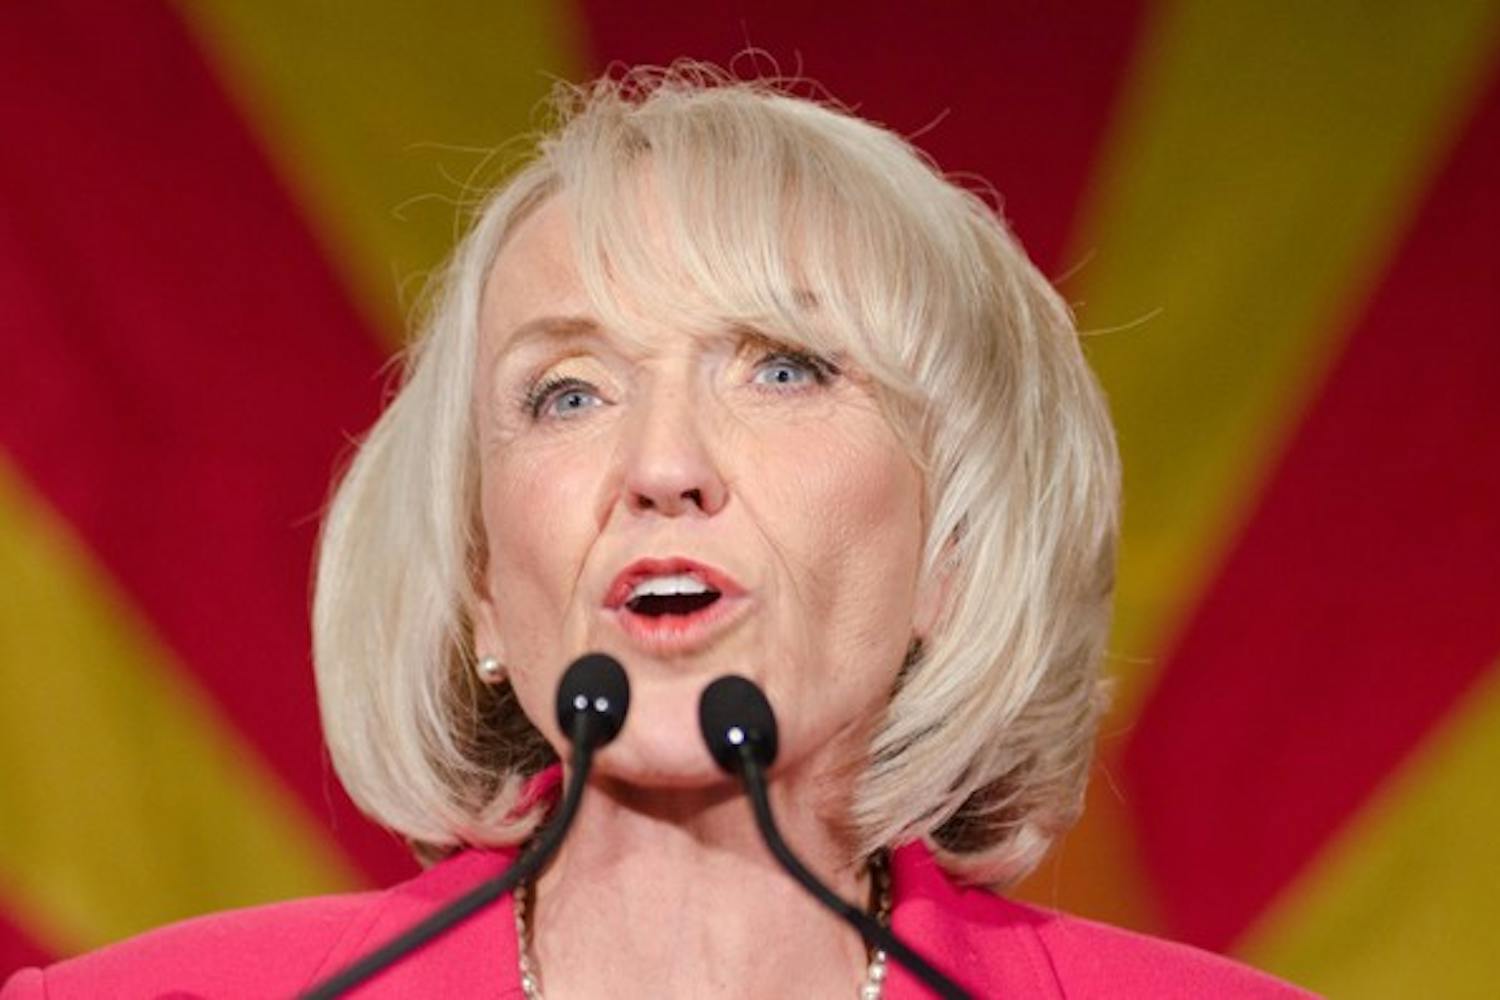 DENIED: Arizona Gov. Jan Brewer addresses the crowd at the Republican election party in Nov. 2010 after winning reelection. Brewer recently vetoed a bill that would have aided the funding of an ASU campus in the town of Payson, leaving the future of the project uncertain. (Photo by Aaron Lavinsky)